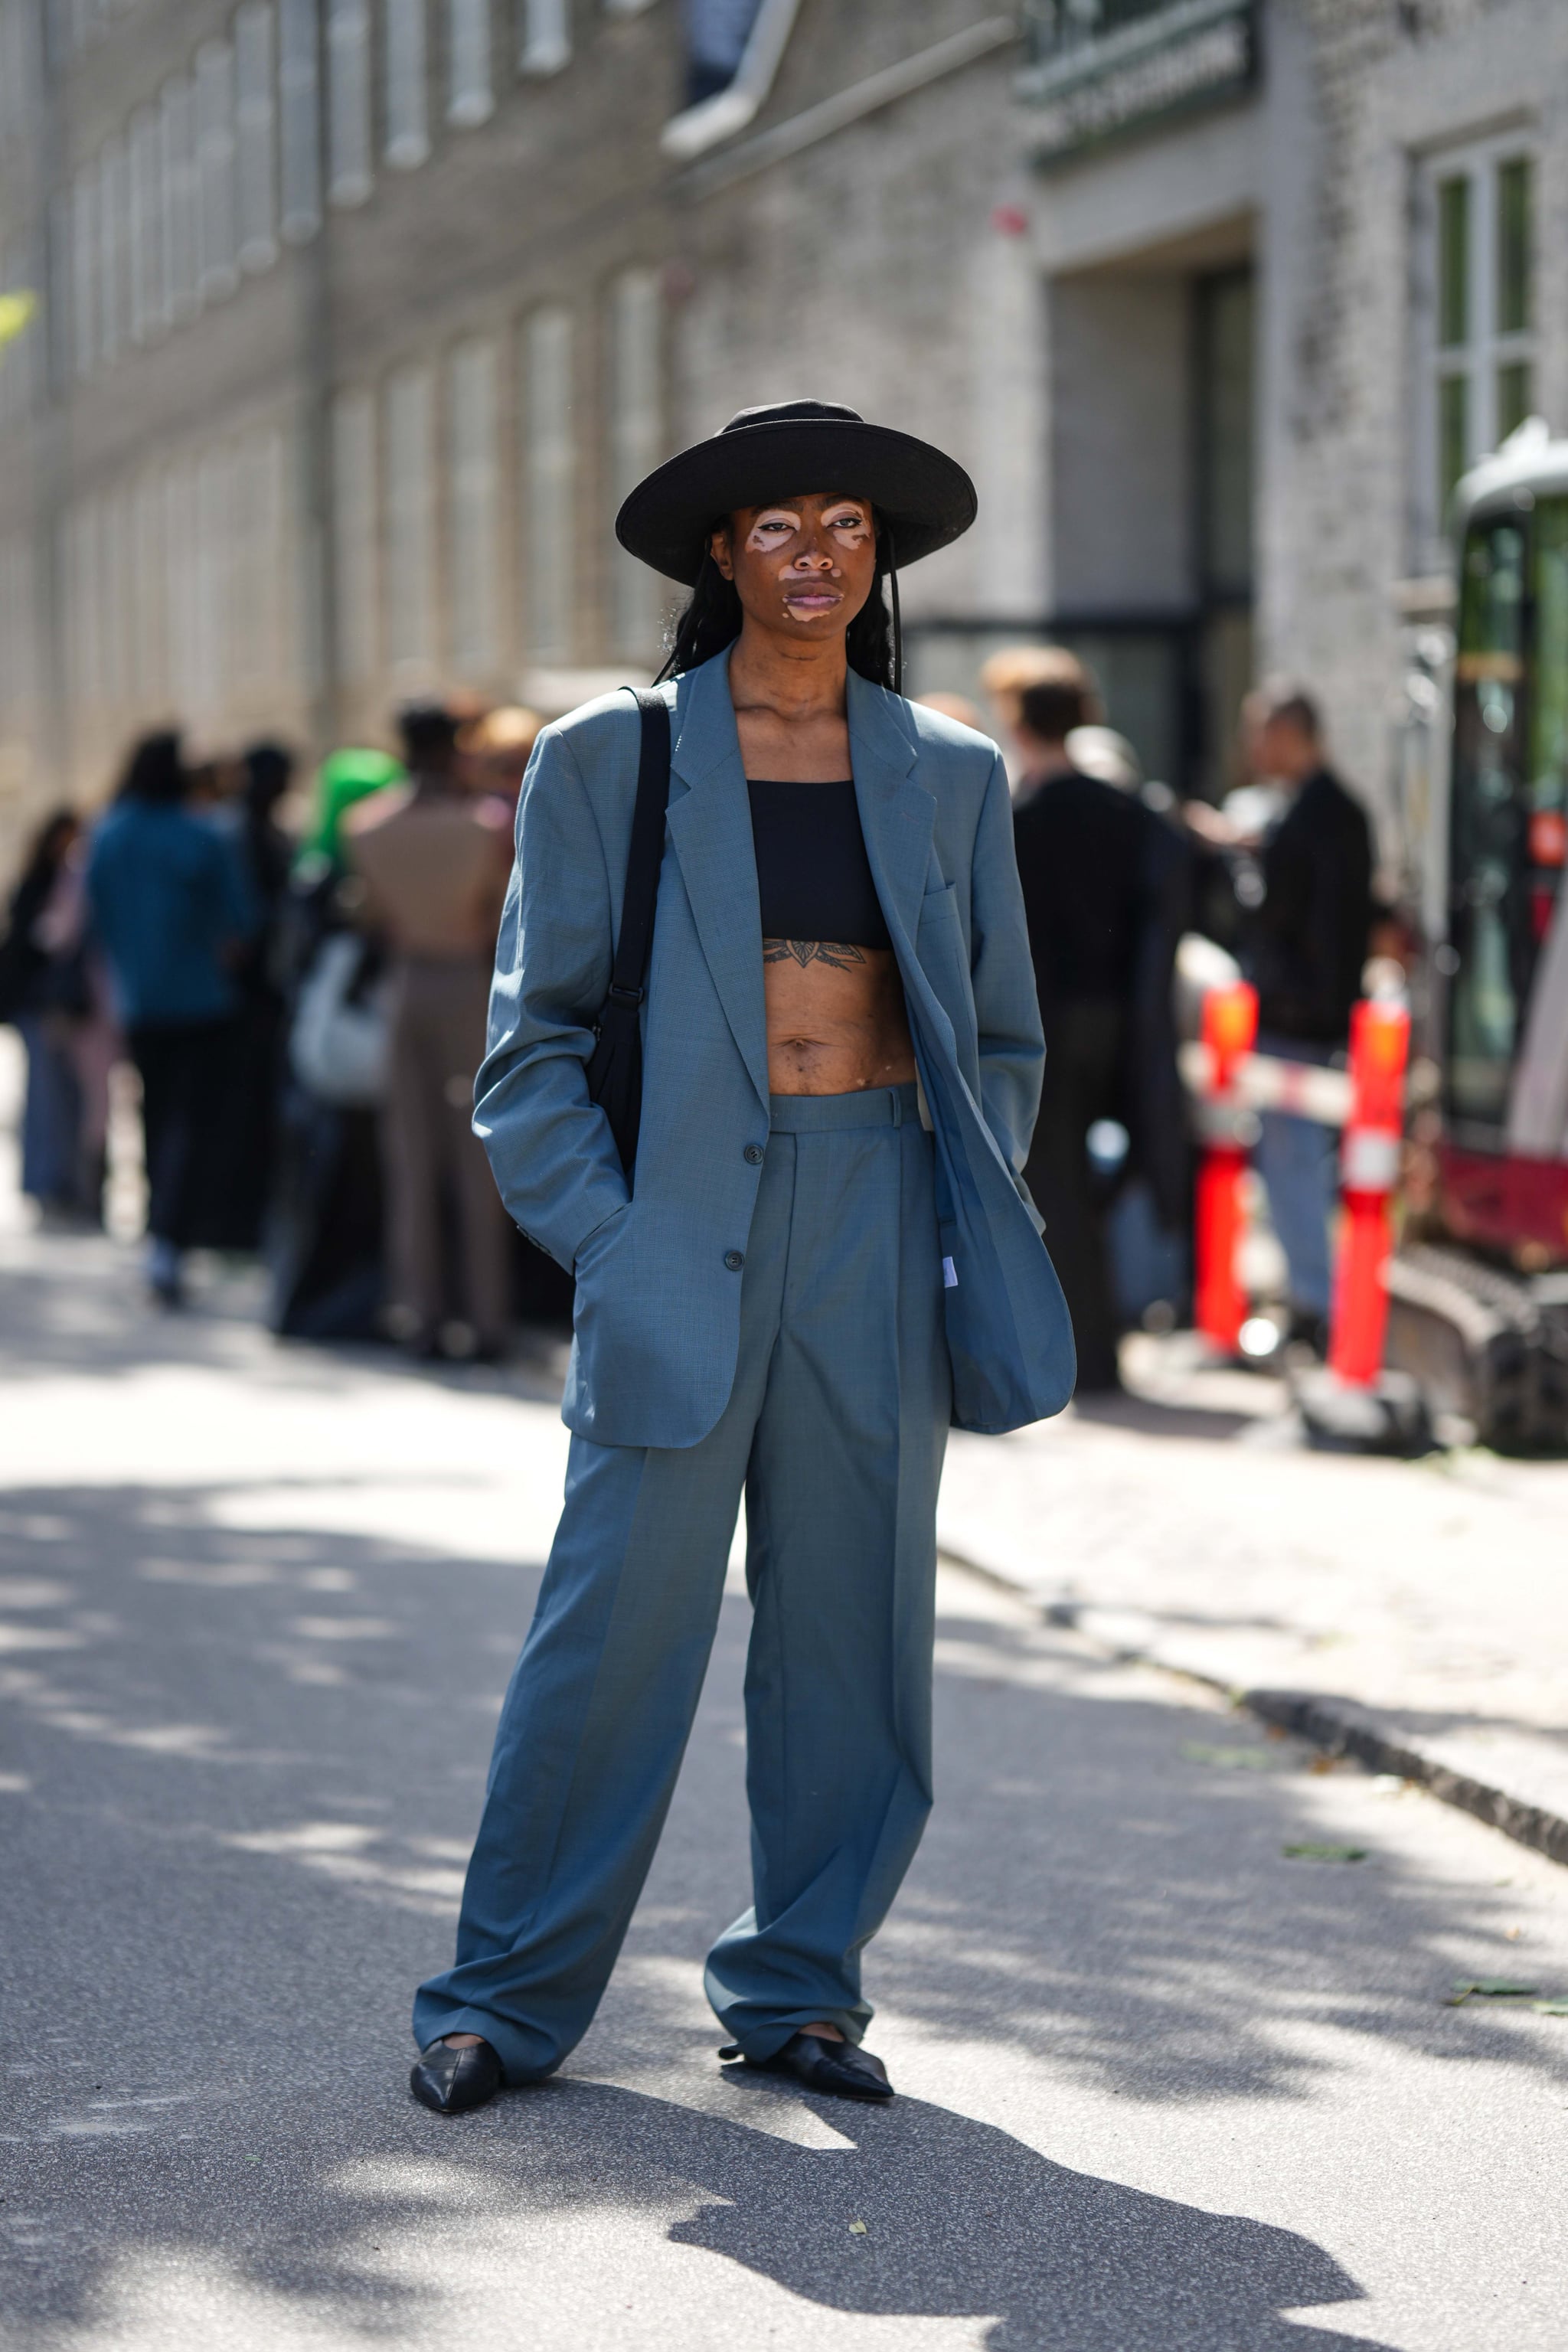 Patchwork fashion: 18 ways to wear the trend in 2021 - TODAY